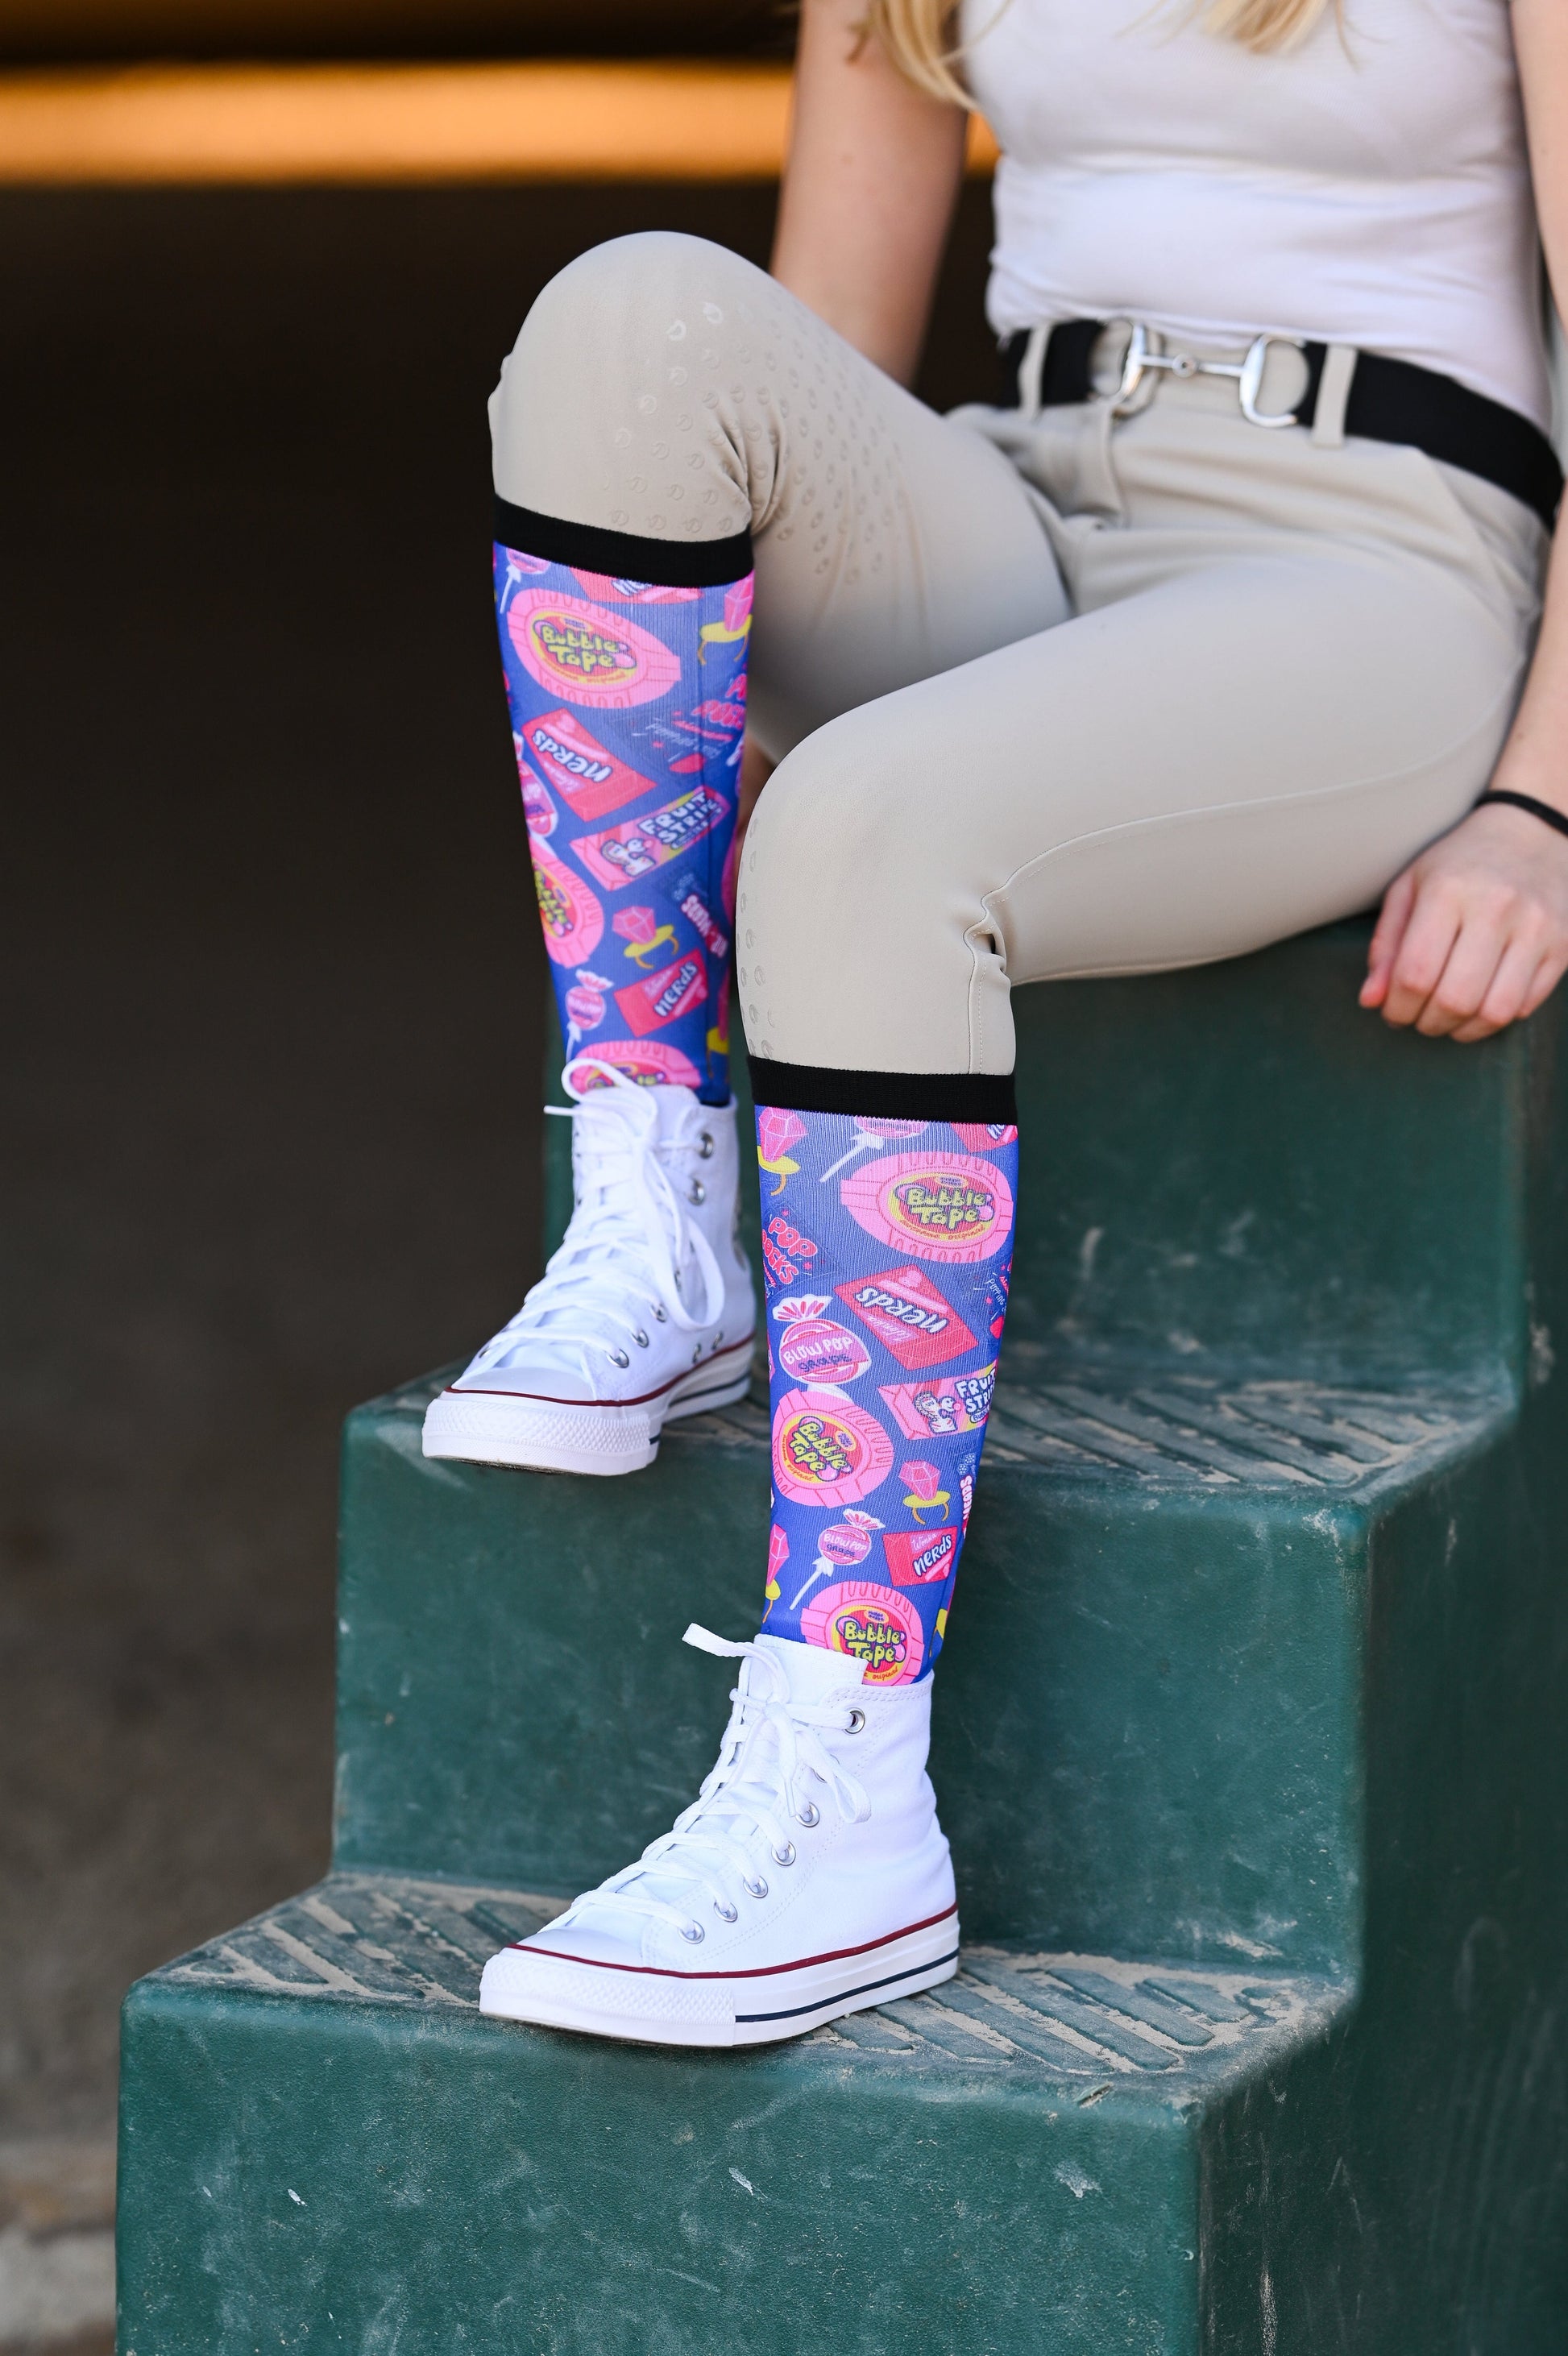 dreamers & schemers Boot Sock Dreamers & Schemers- Yes We Candy equestrian team apparel online tack store mobile tack store custom farm apparel custom show stable clothing equestrian lifestyle horse show clothing riding clothes horses equestrian tack store